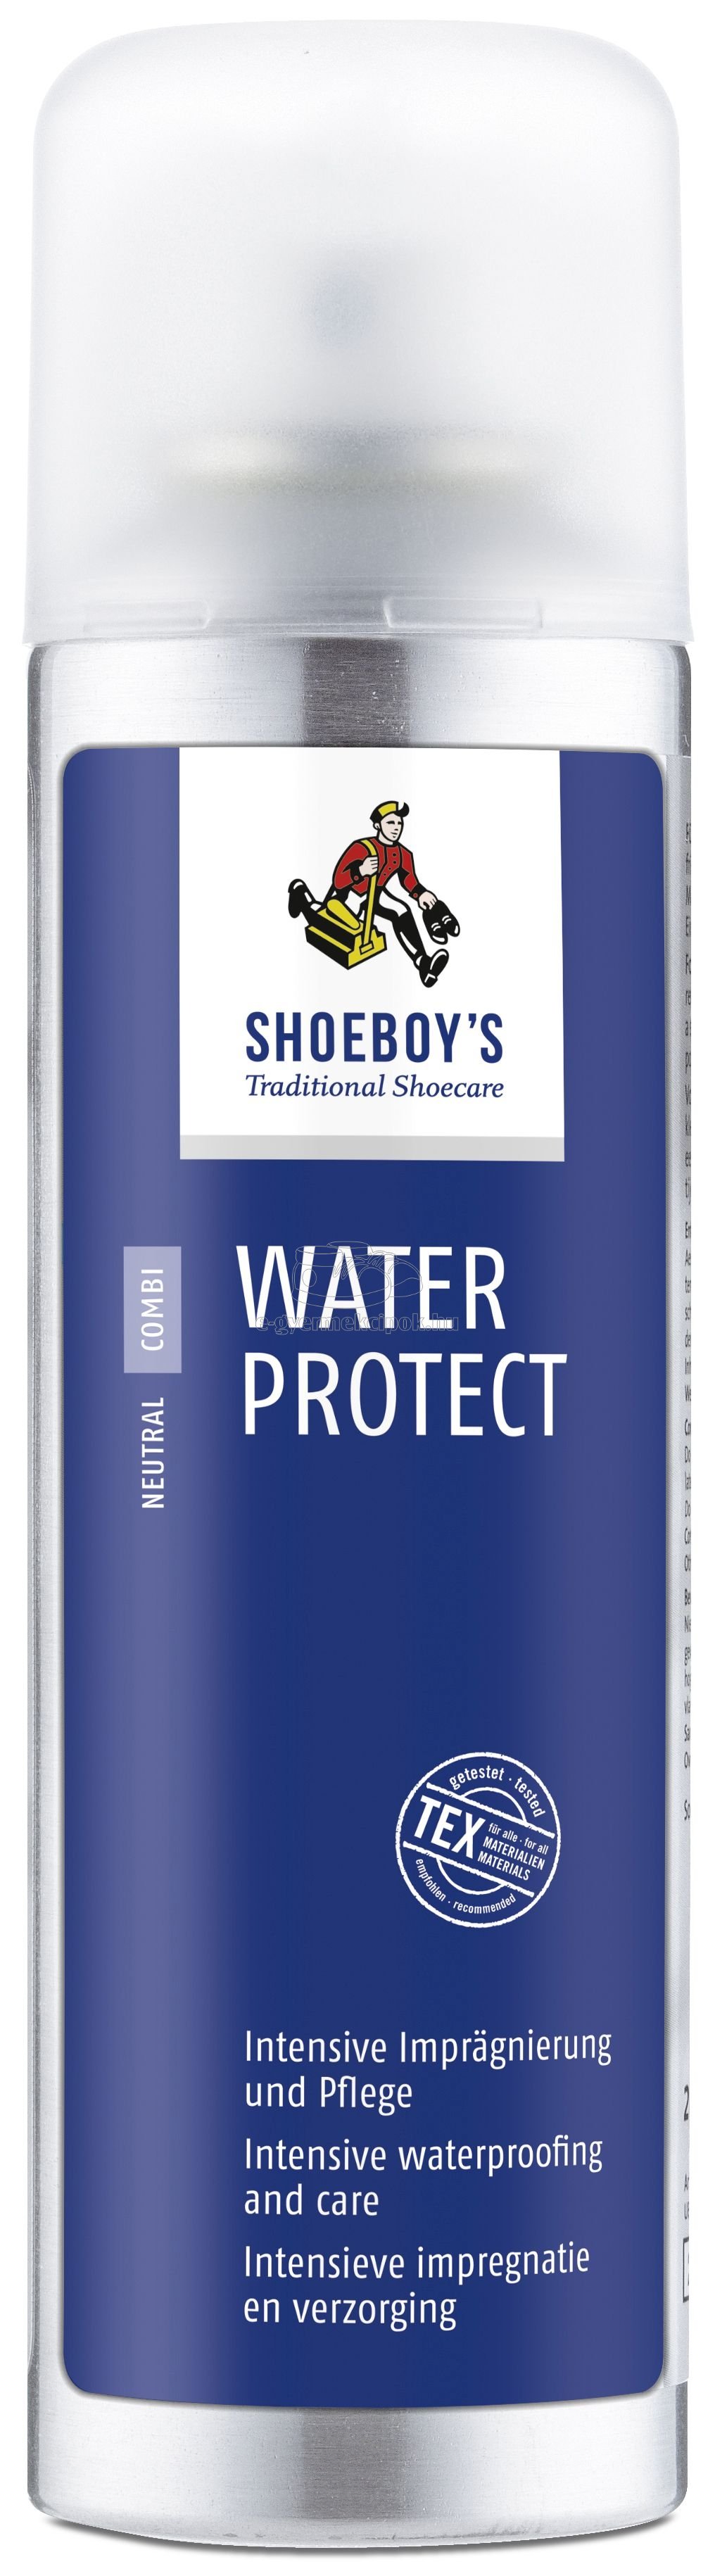 Shoeboy's WATER PROTECT 200 ml